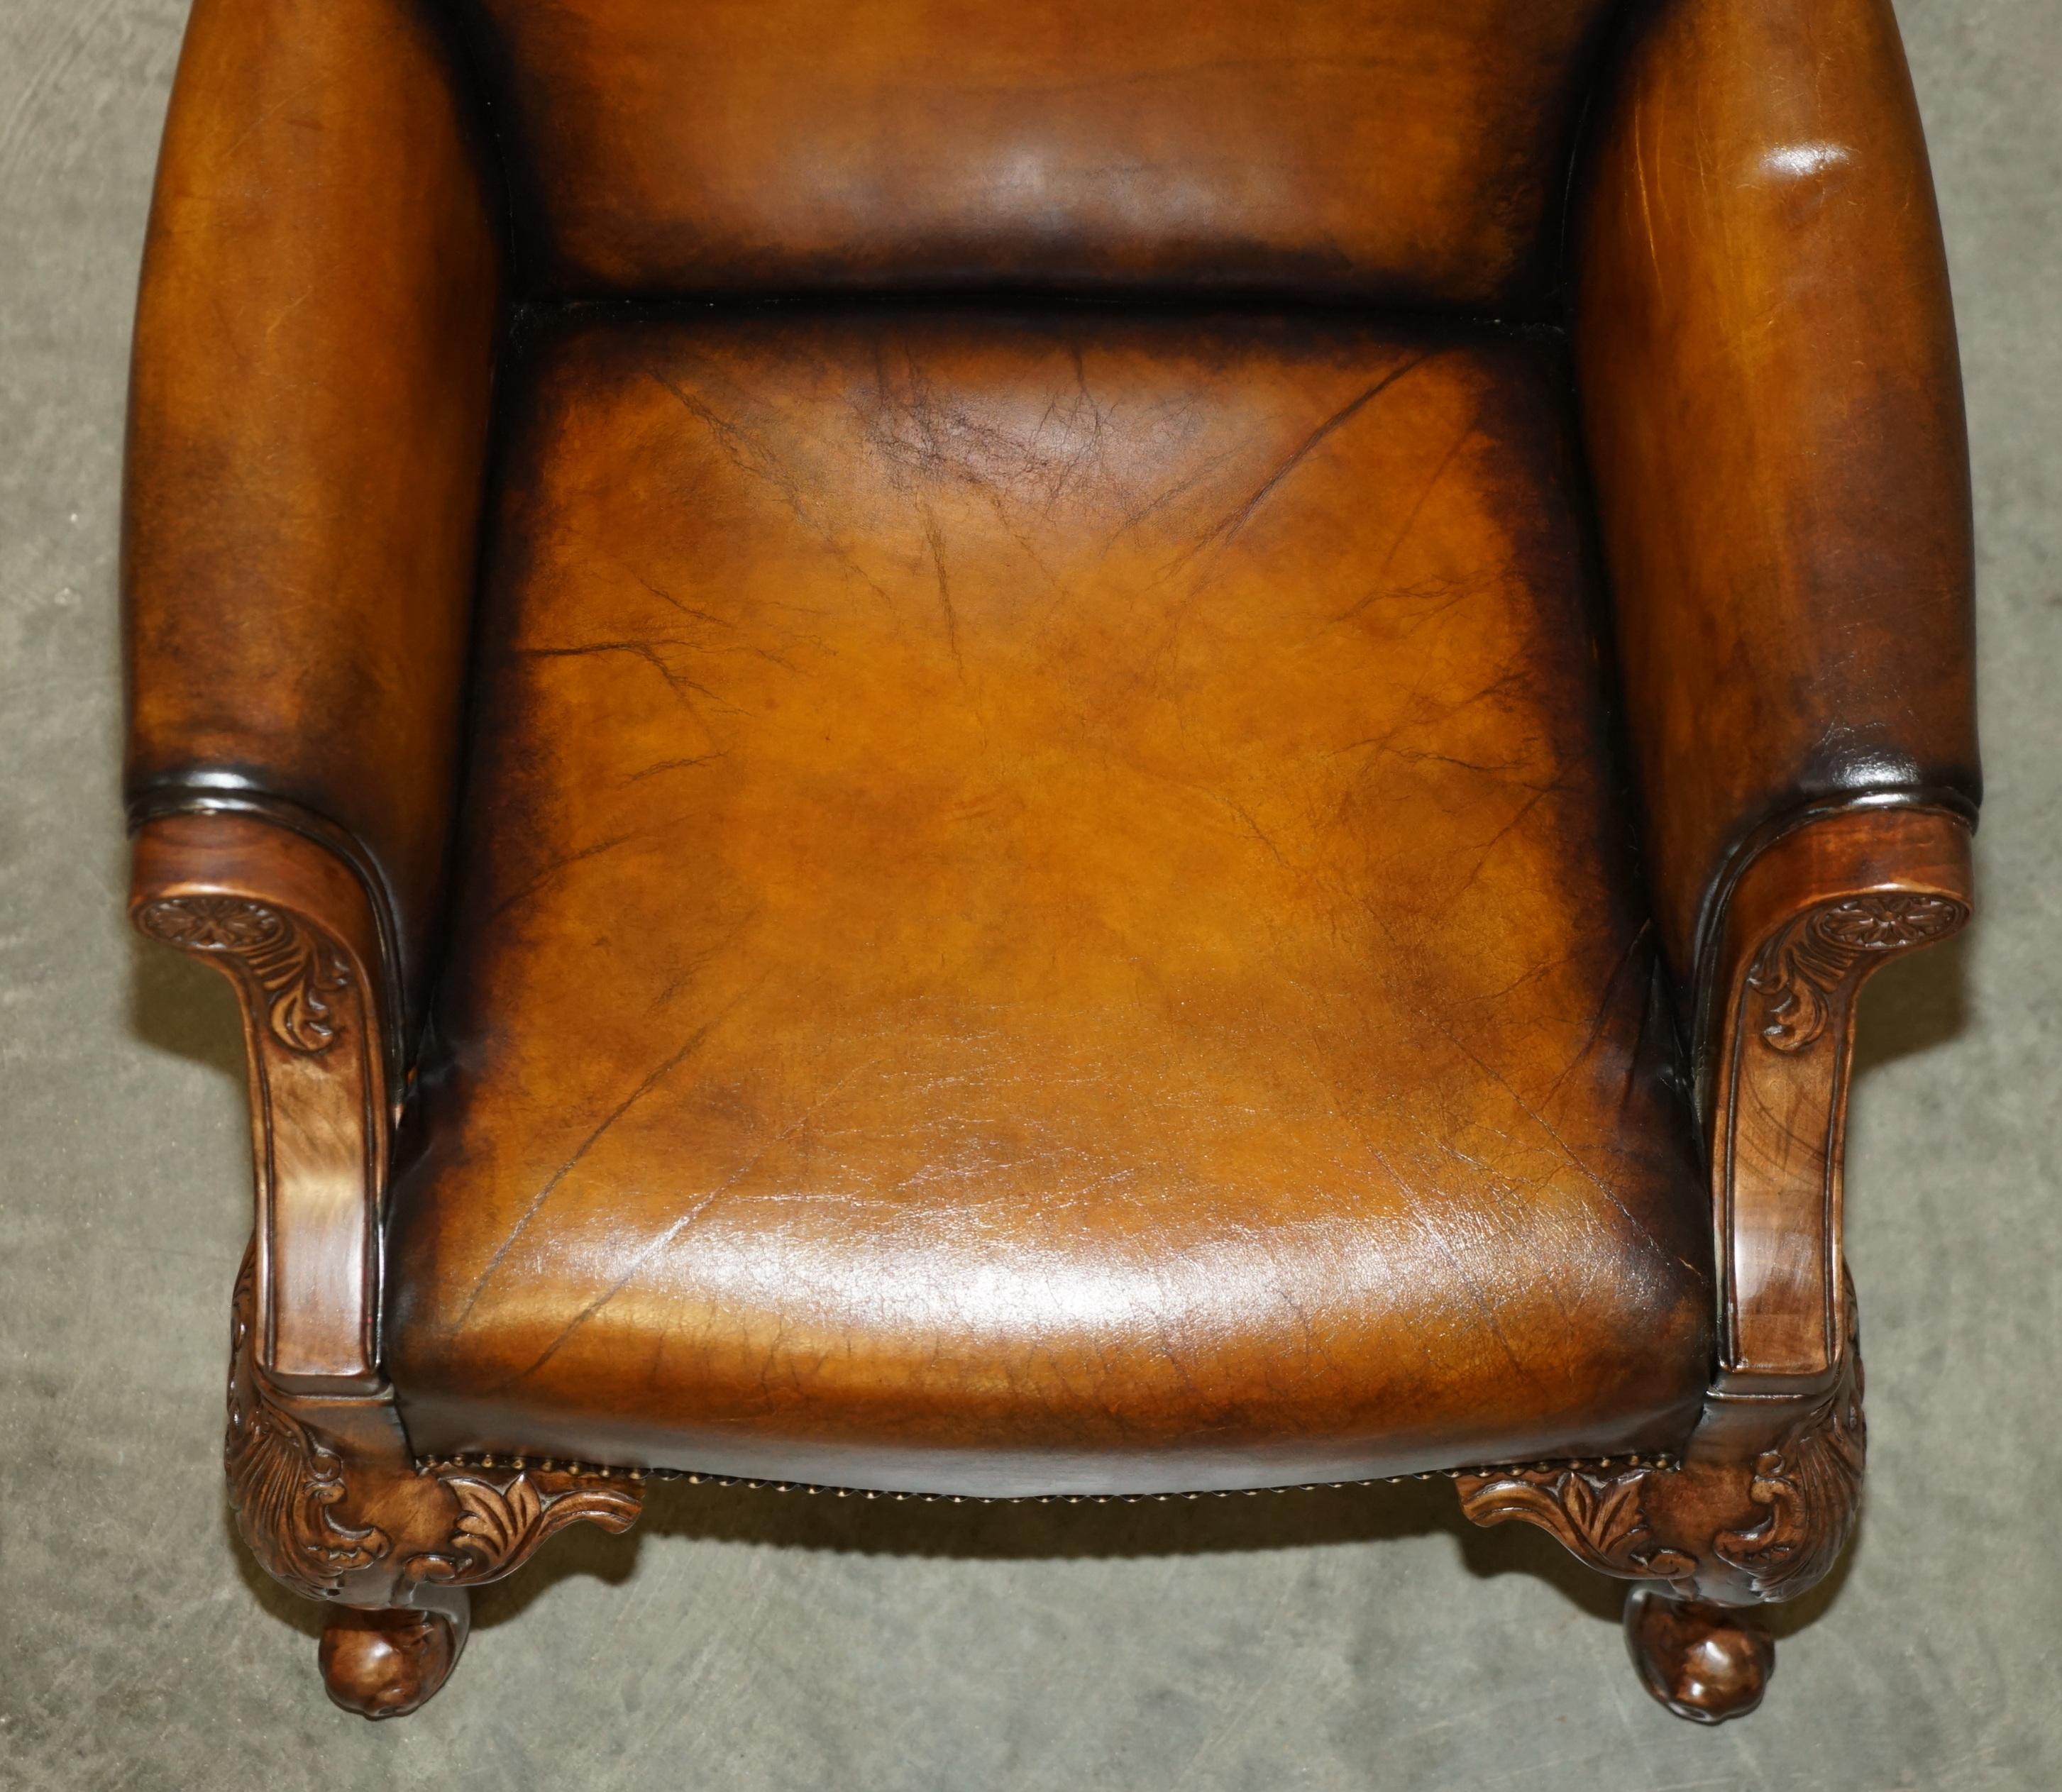 PAIR OF ANTIQUE HEAVILY CARved HAND DYED BROWN LEATHER RESTORED THRONE ARMCHAIRs im Angebot 4